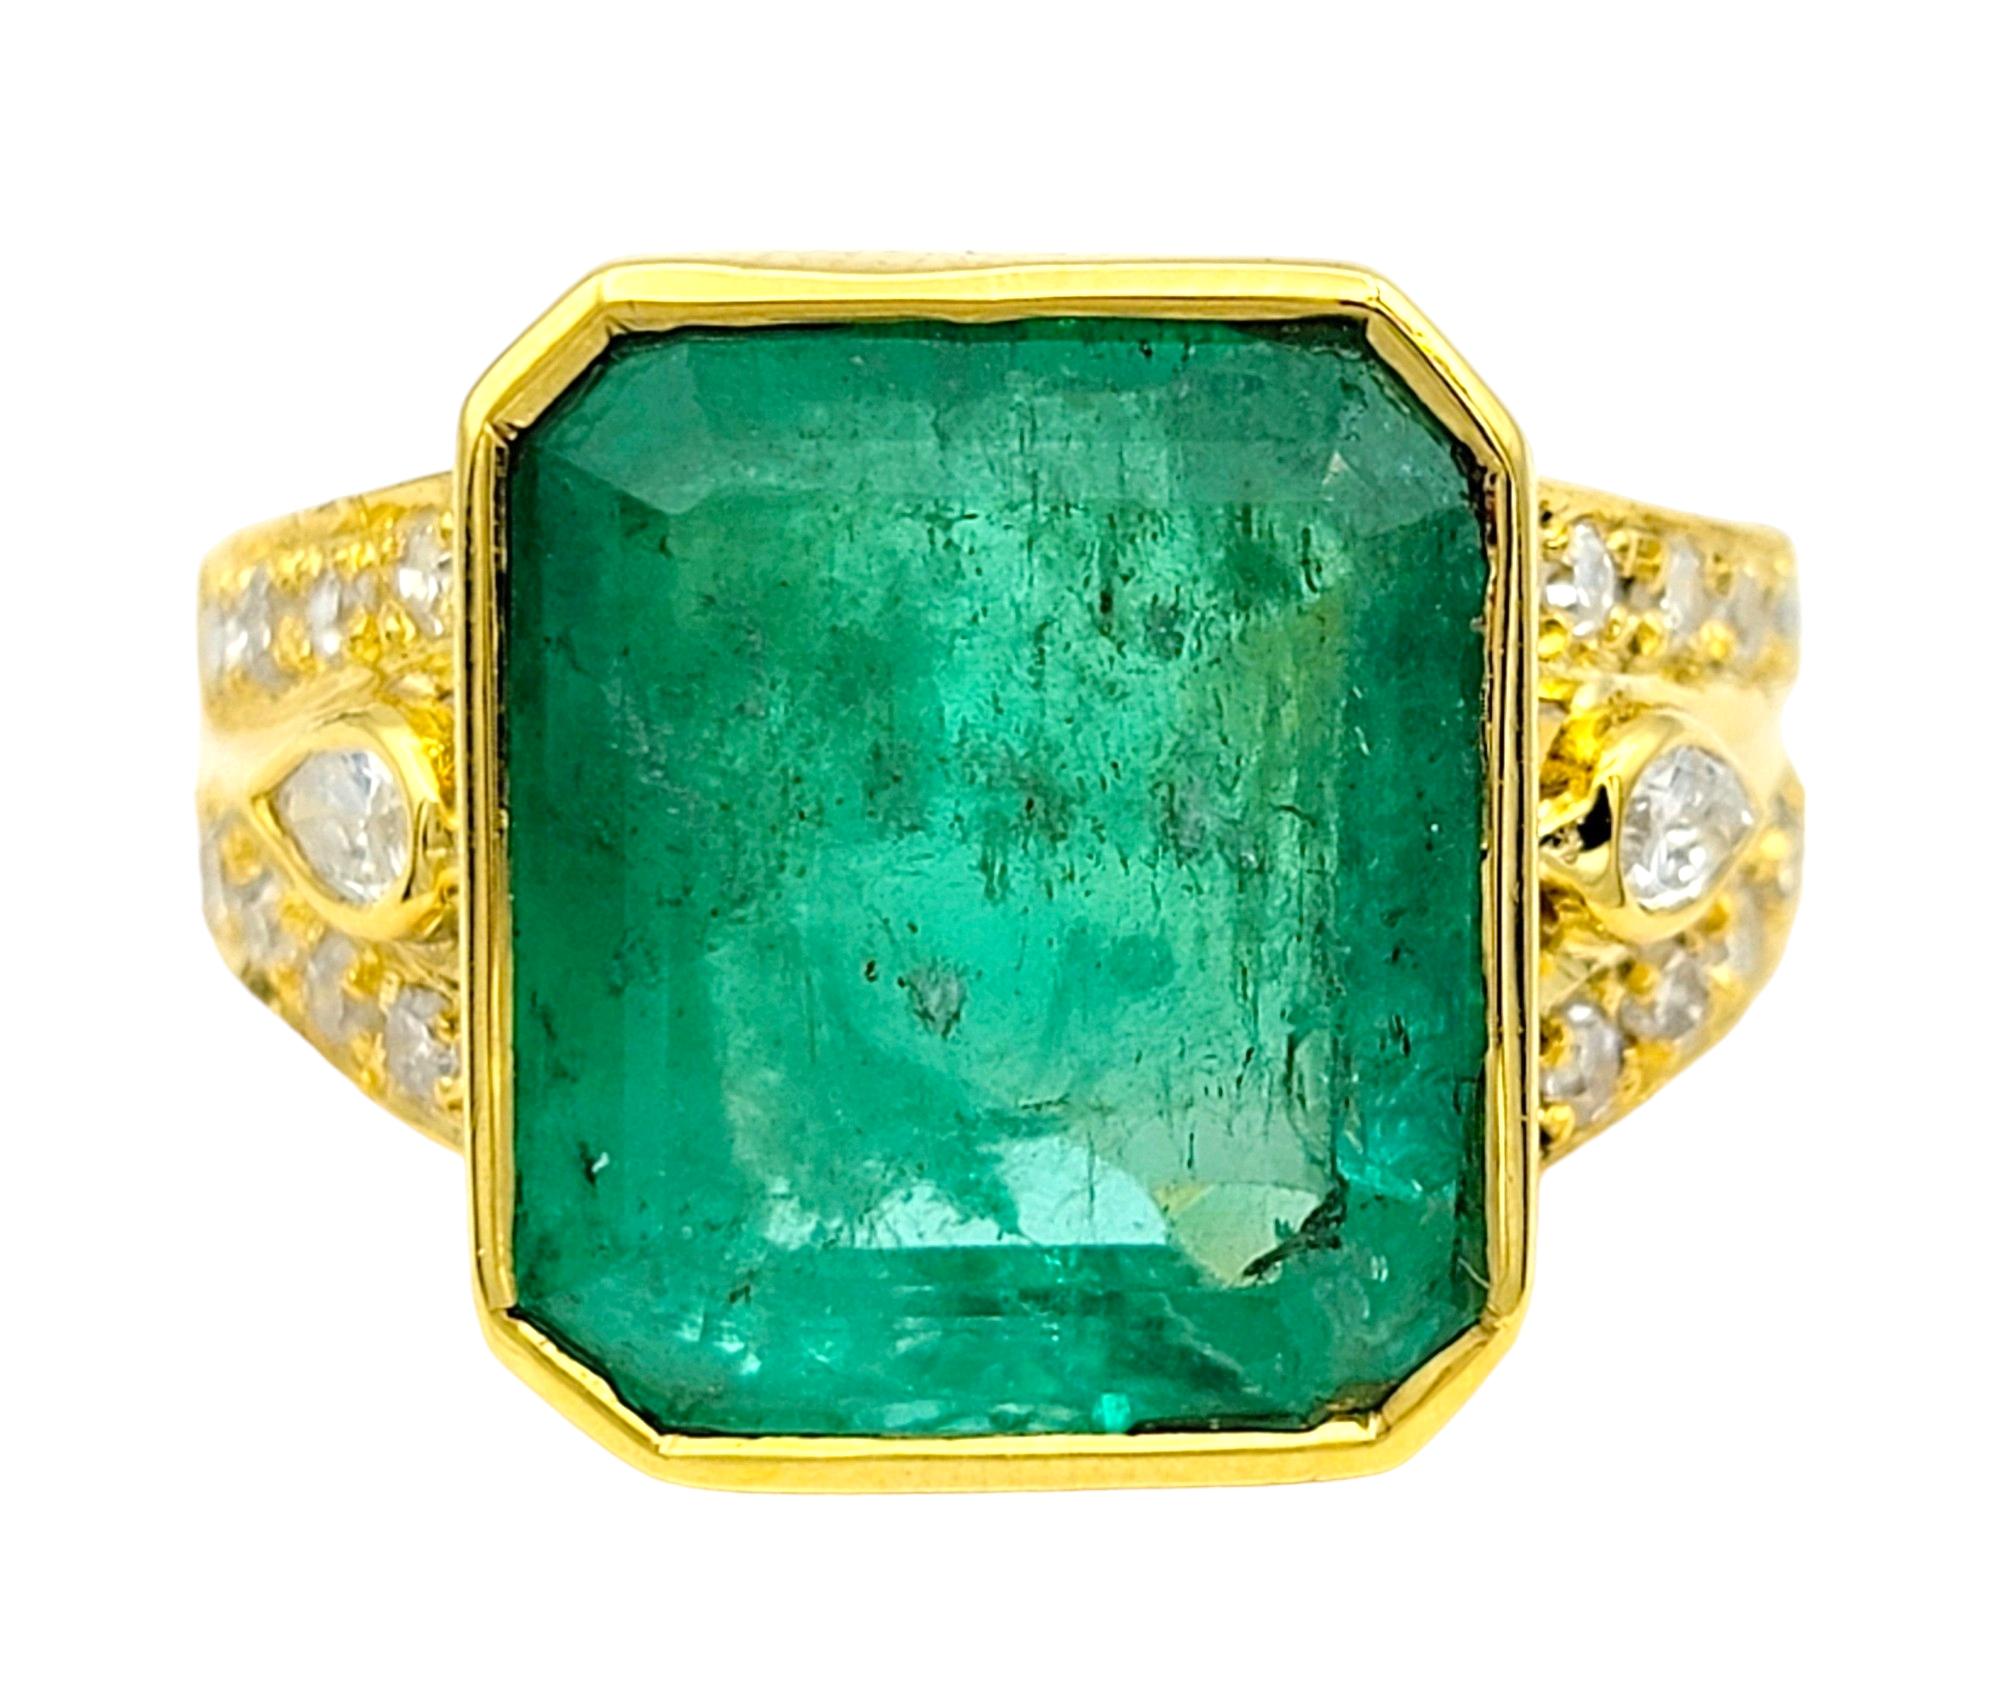 Ring Size: 7.5

This stunning cocktail ring exudes timeless elegance and sophistication with its luscious emerald centerpiece set in luxurious 18 karat yellow gold. The emerald, with its captivating emerald-cut, takes center stage, radiating a deep